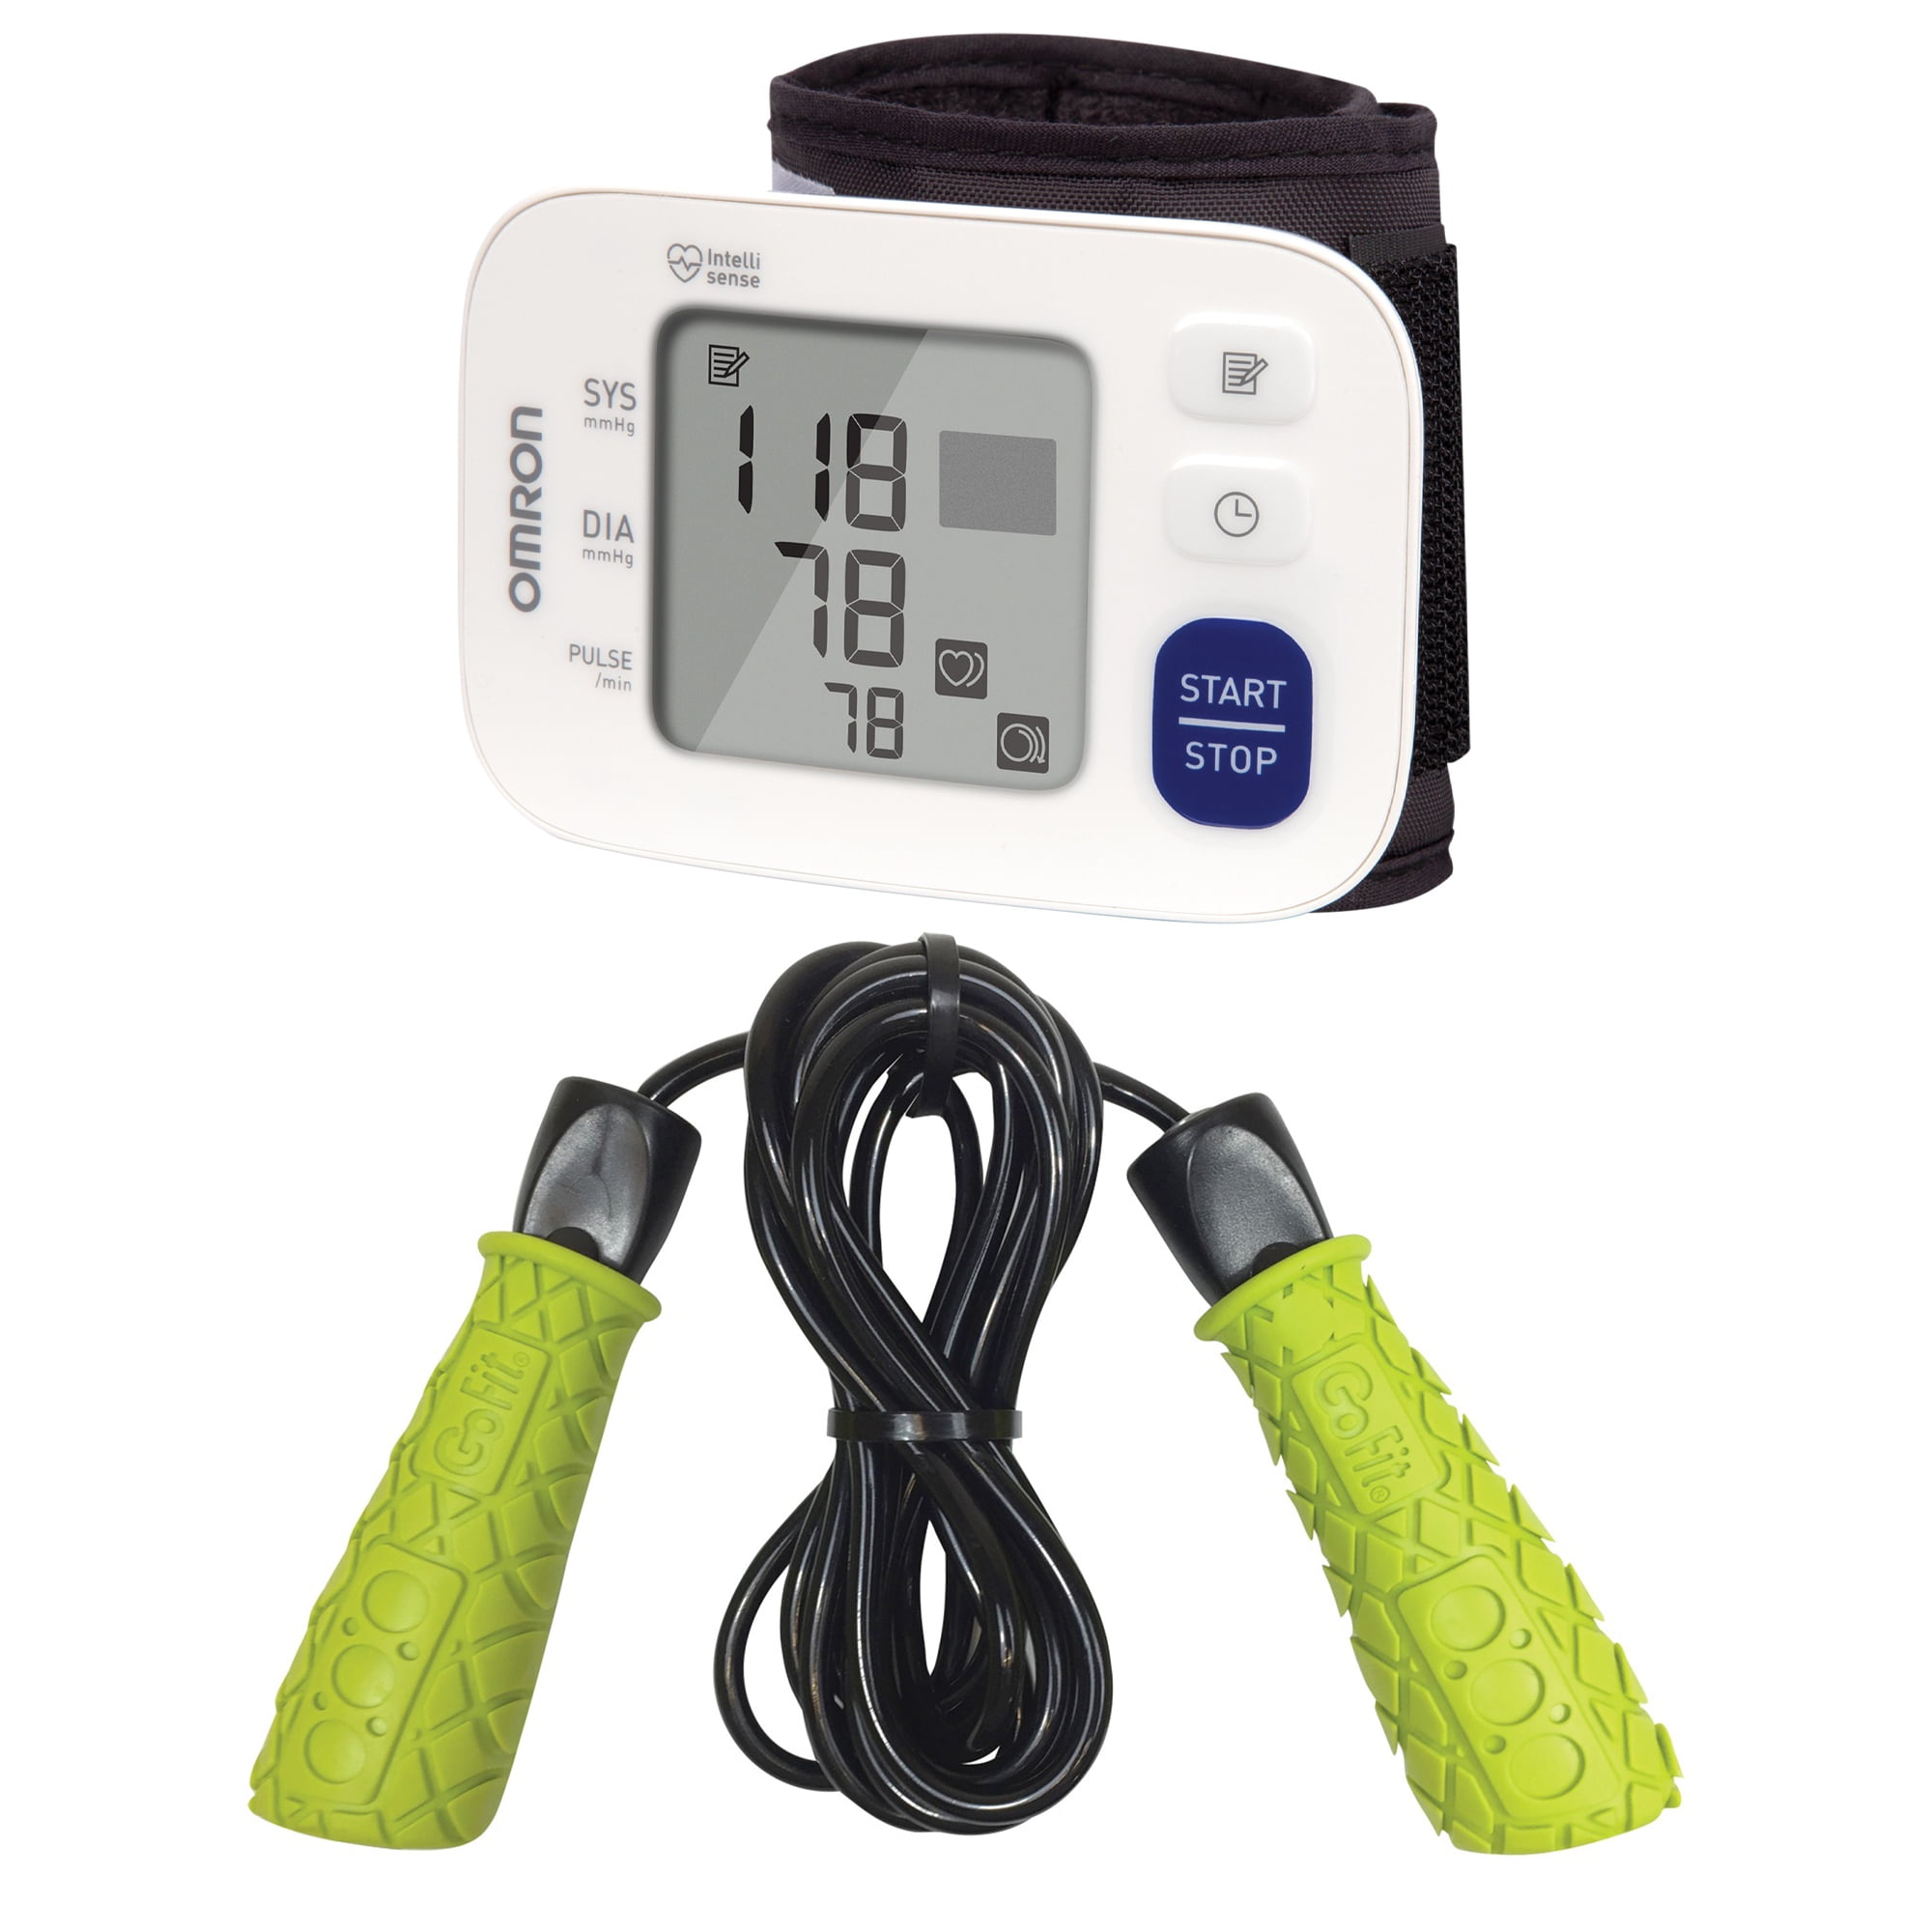 Omron 3 Series BP6100 Blood Pressure Monitor Review - Consumer Reports